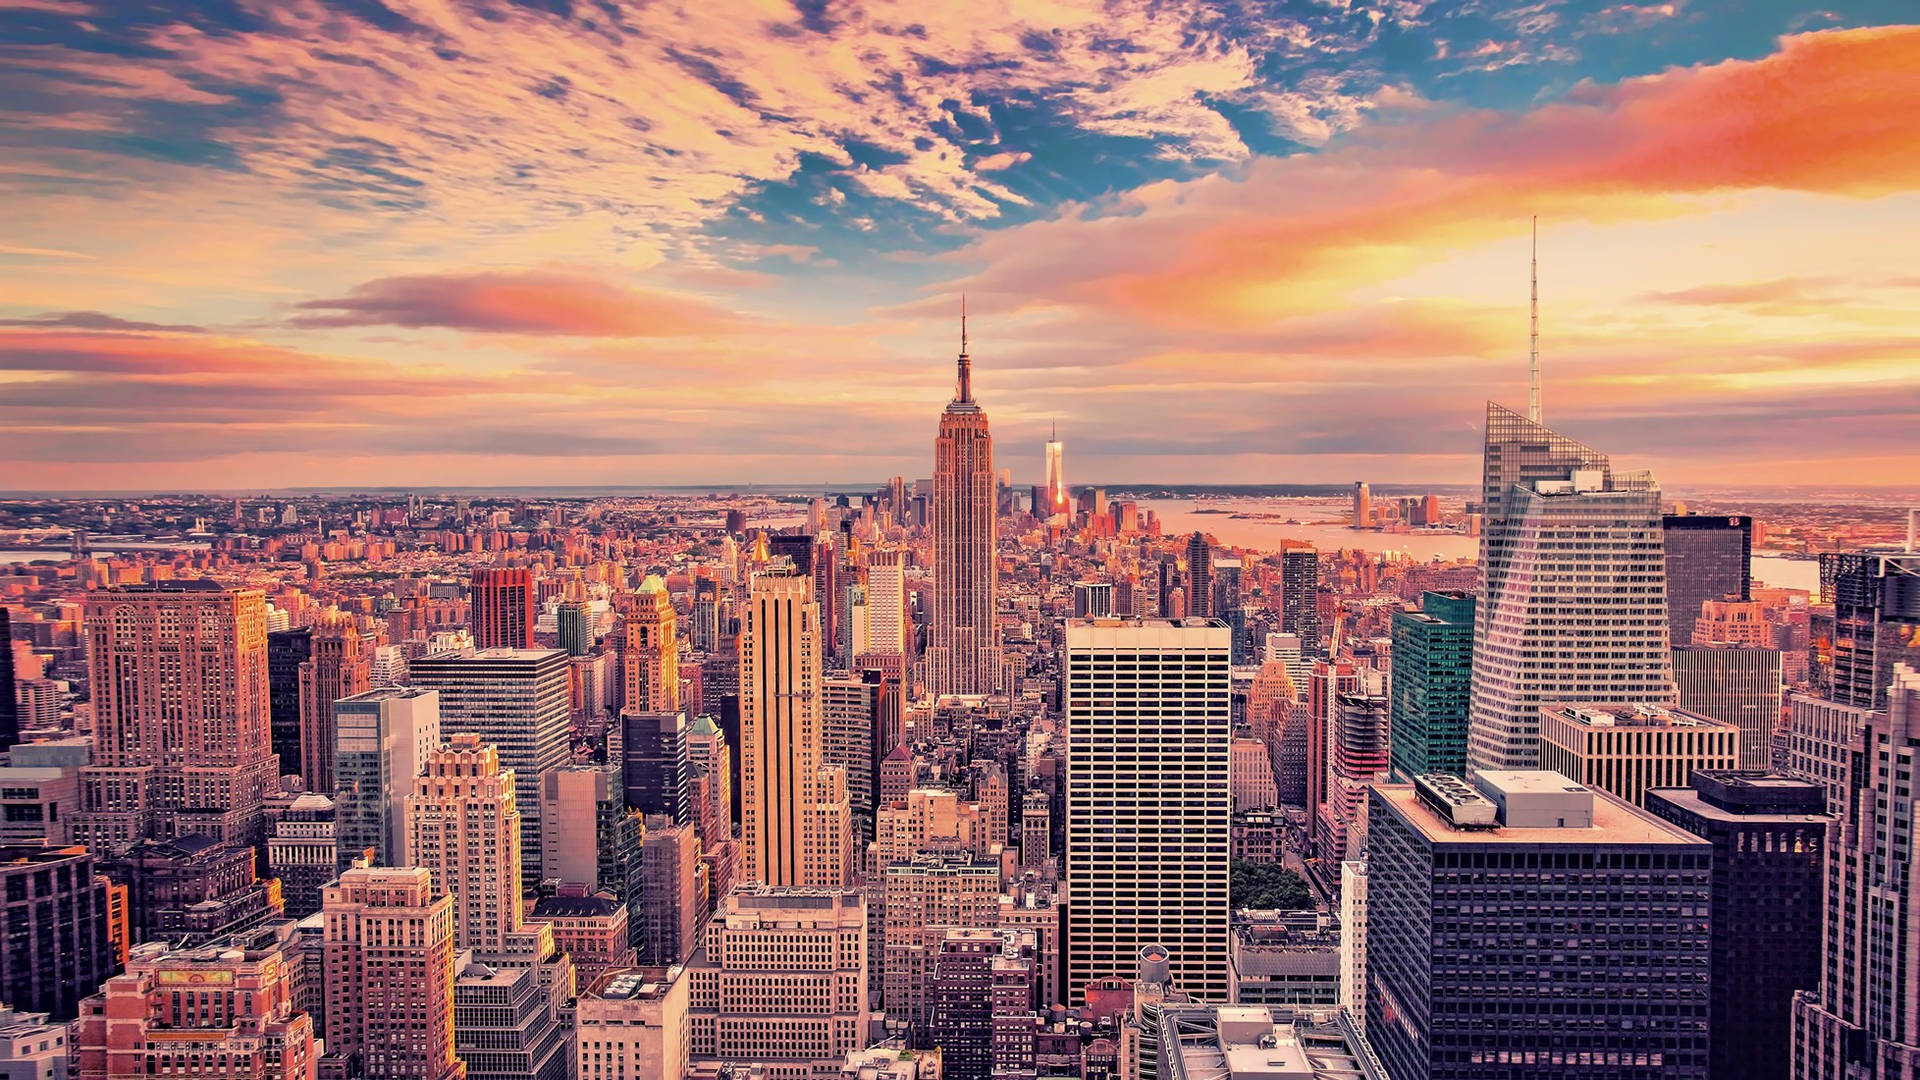 Explore the majestic beauty of New York City from your desktop Wallpaper